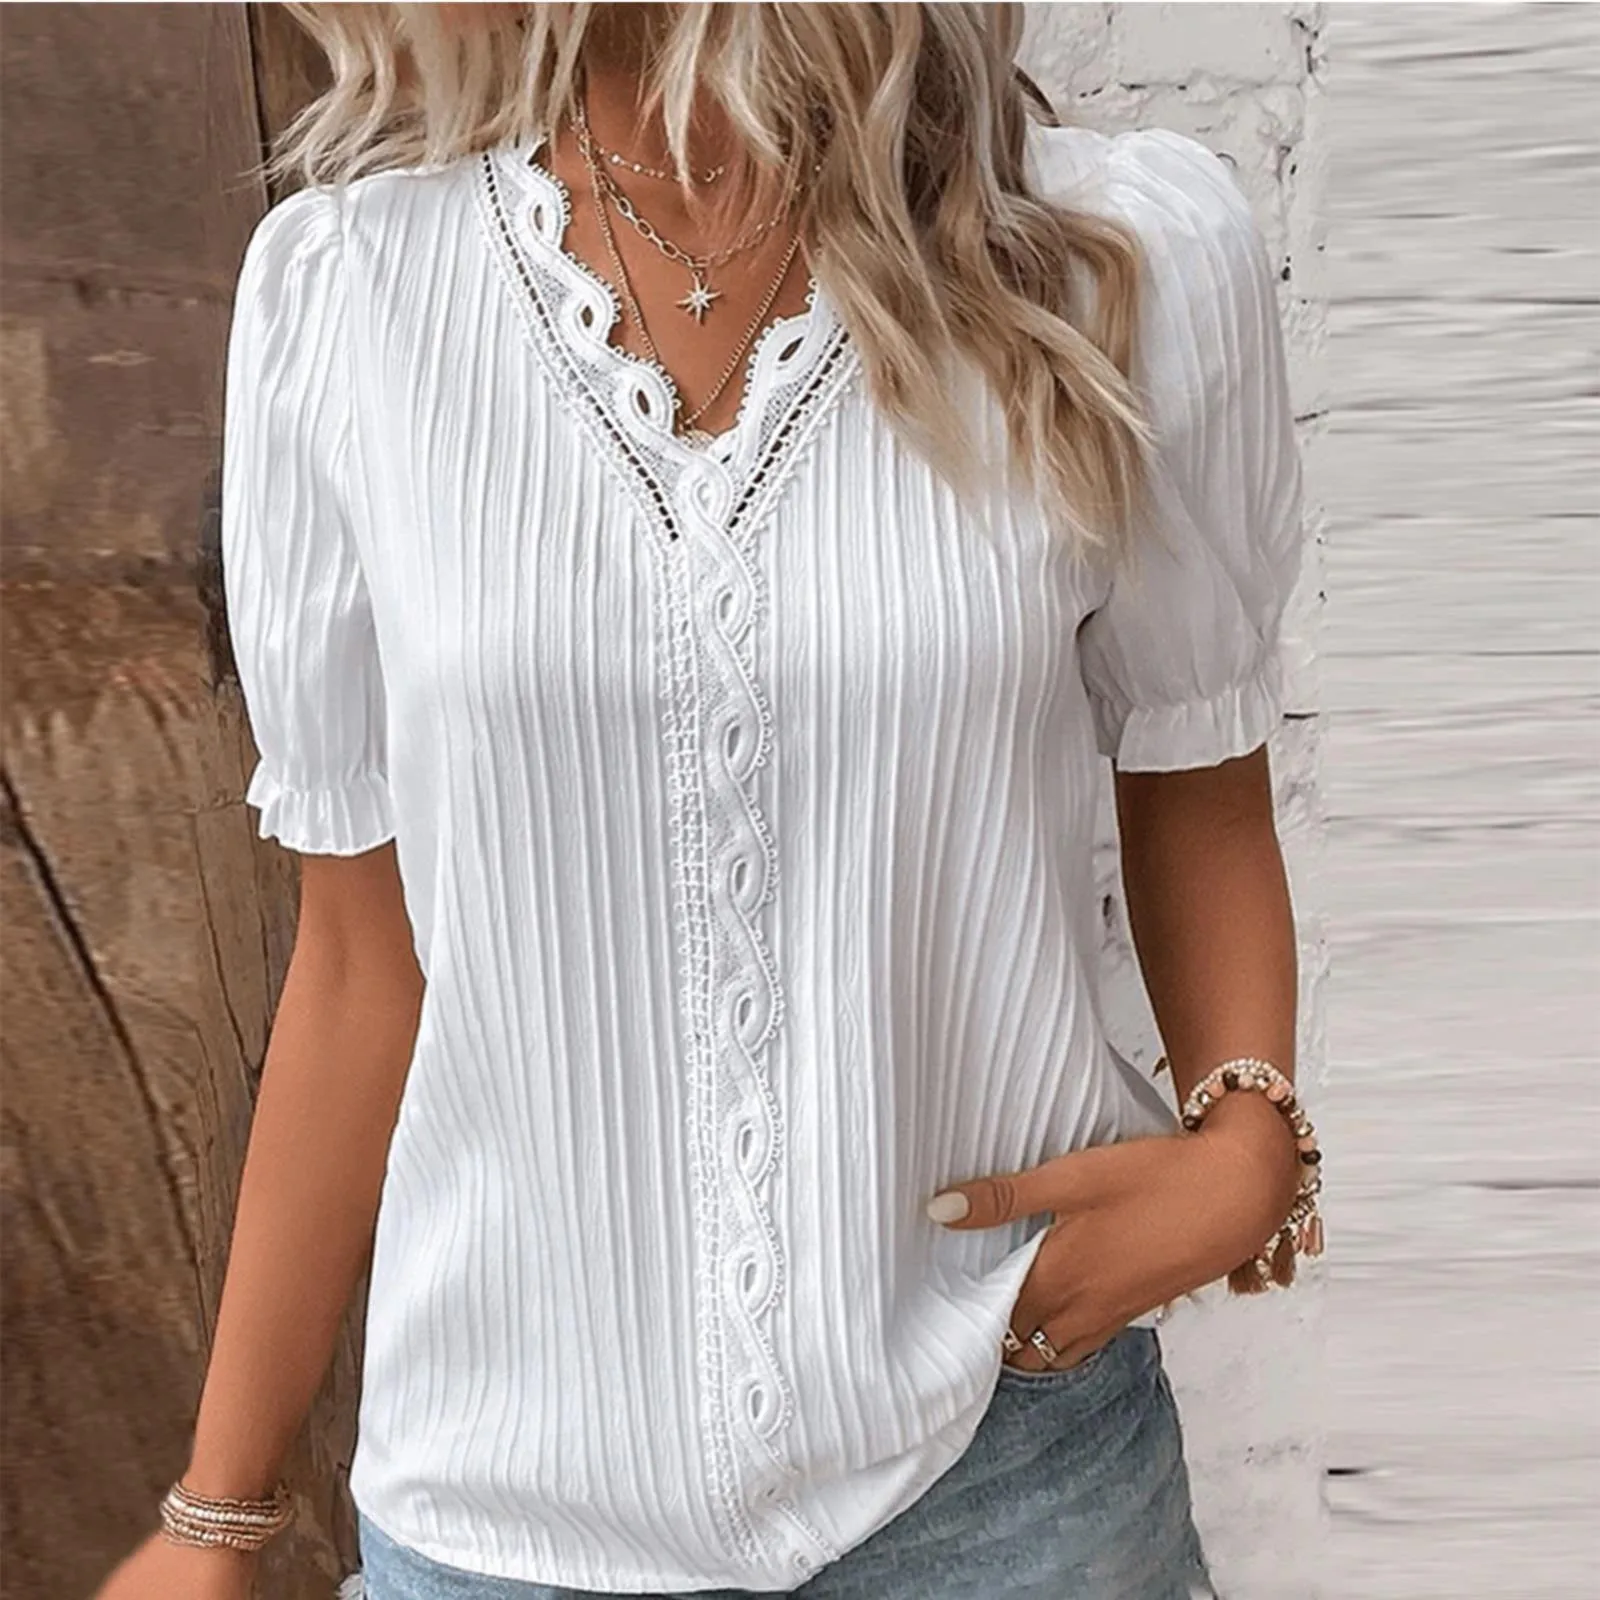 

Women Plus Size Lace V Neck Shirt, Ventilate Summer Solid Short Sleeve Tops, Comfy Soft Breathable Tee Shirts, Outdoors Clothing